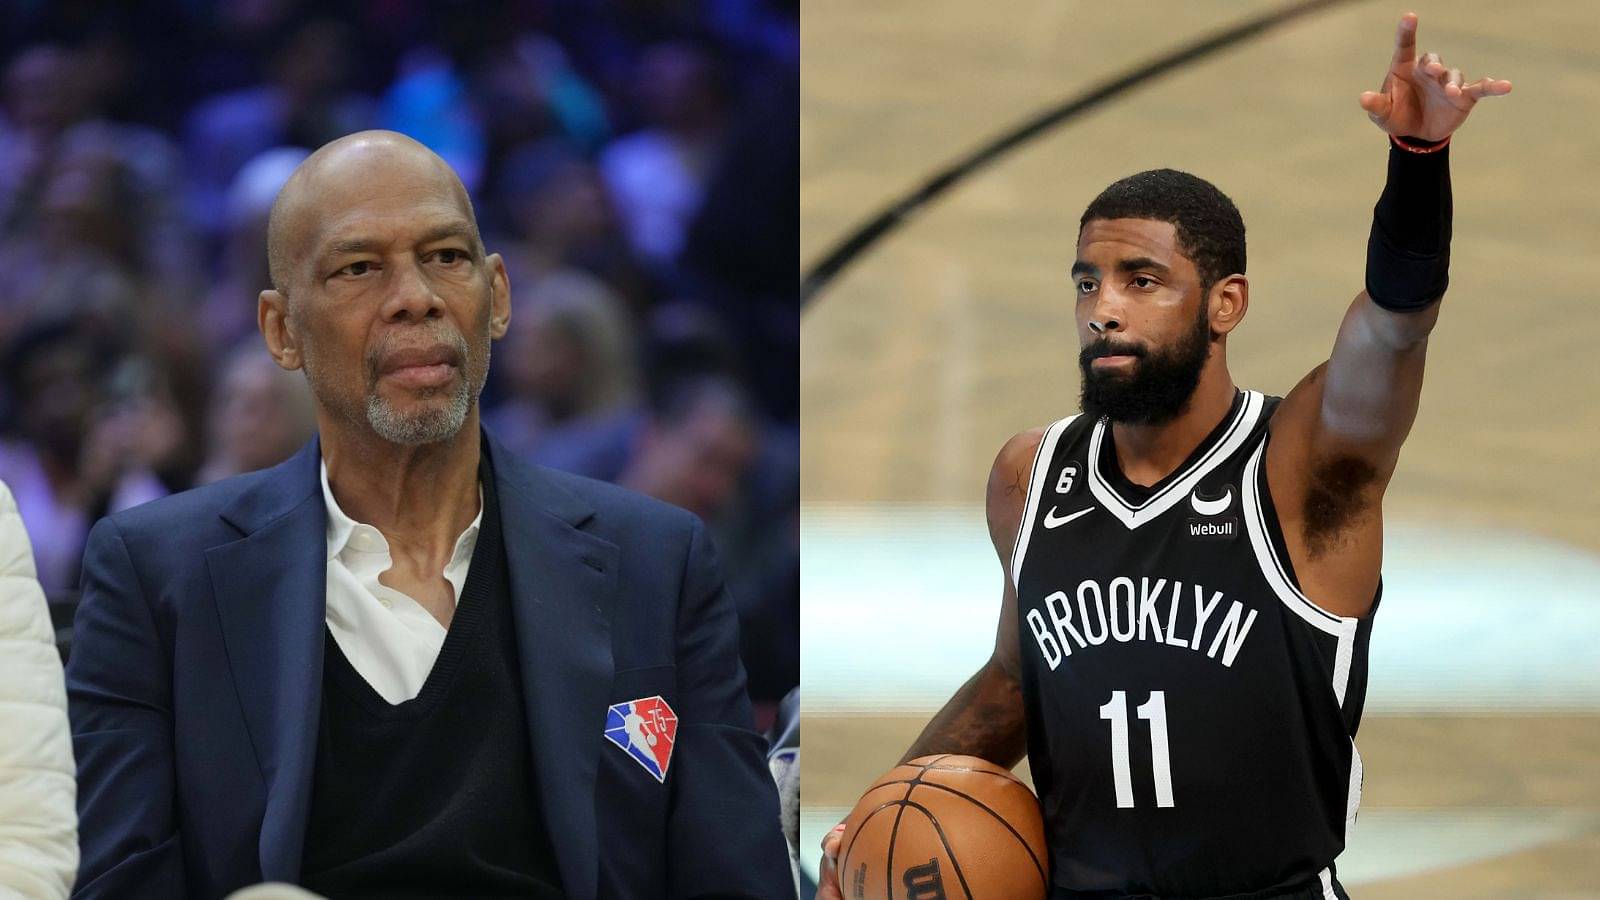 “Someone is Telling Kareem Abdul Jabbar to Stay Relevant”: Kyrie Irving Finds Support From Unexpected Source in Antisemitic Debacle